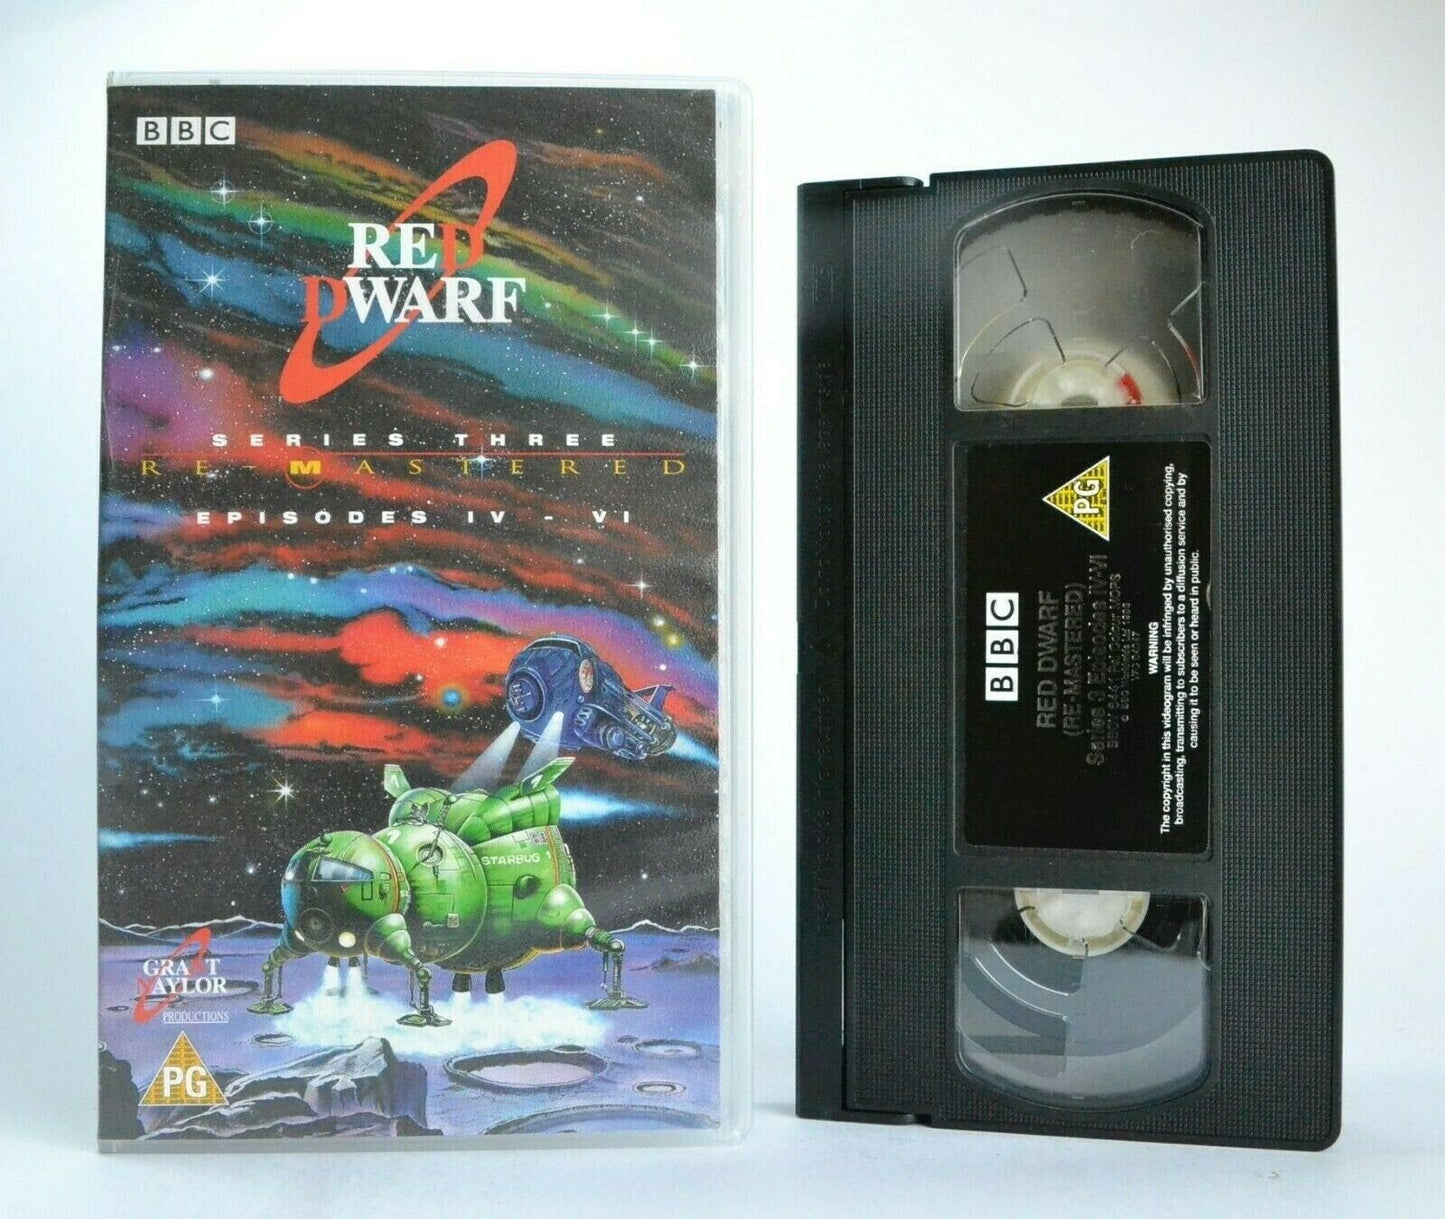 Red Dwarf: Series 3/Episodes 4-6 - Remastered - Sci-Fi Comedy Franchise - VHS-